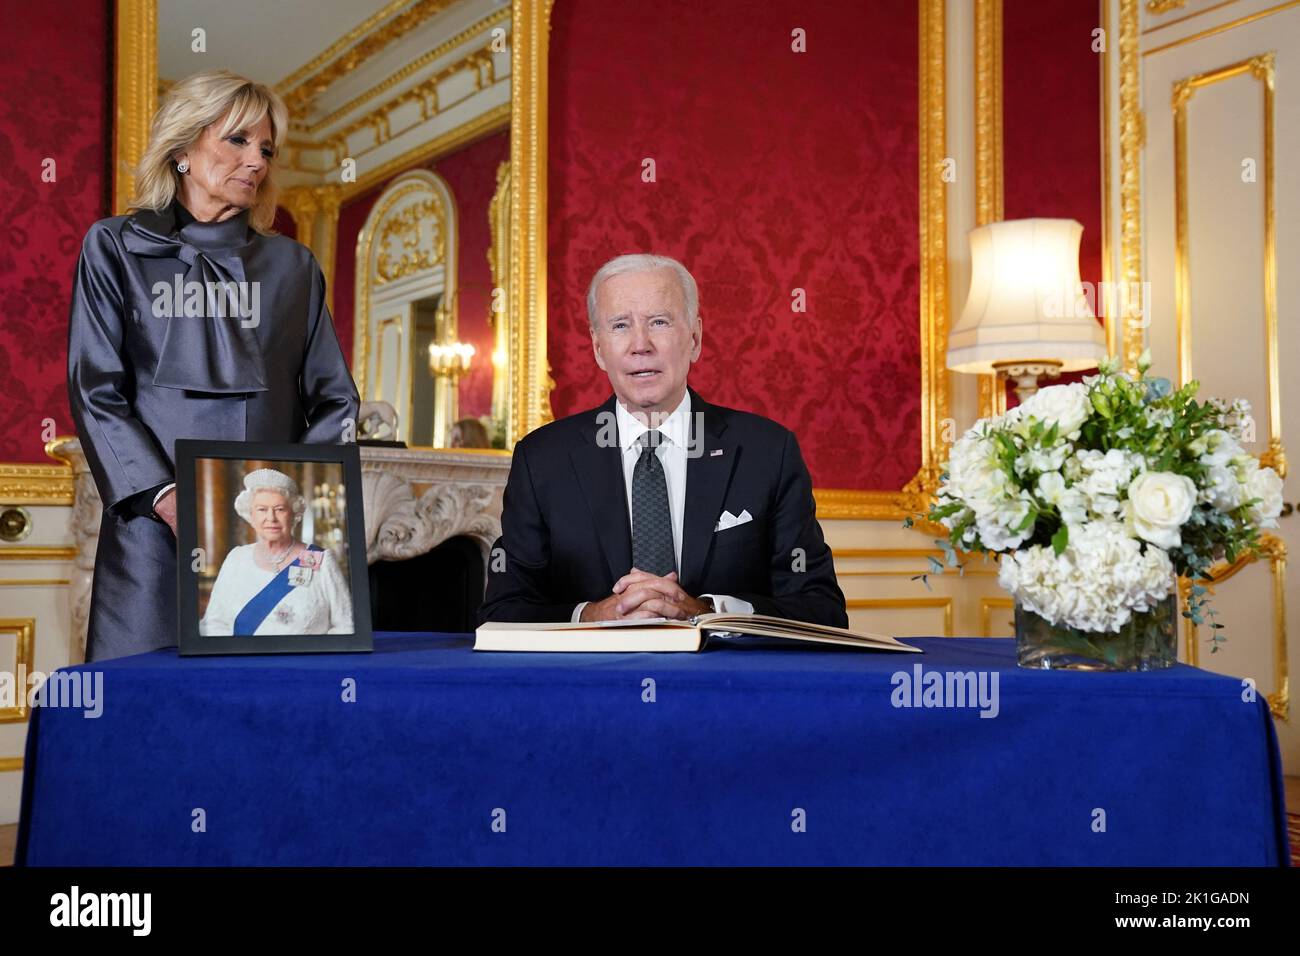 U.S. President Joe Biden and first lady Jill Biden prepare to sign a condolence book for Britain's Queen Elizabeth, following her death, at Lancaster House in London, Britain, September 18, 2022. REUTERS/Kevin Lamarque Stock Photo